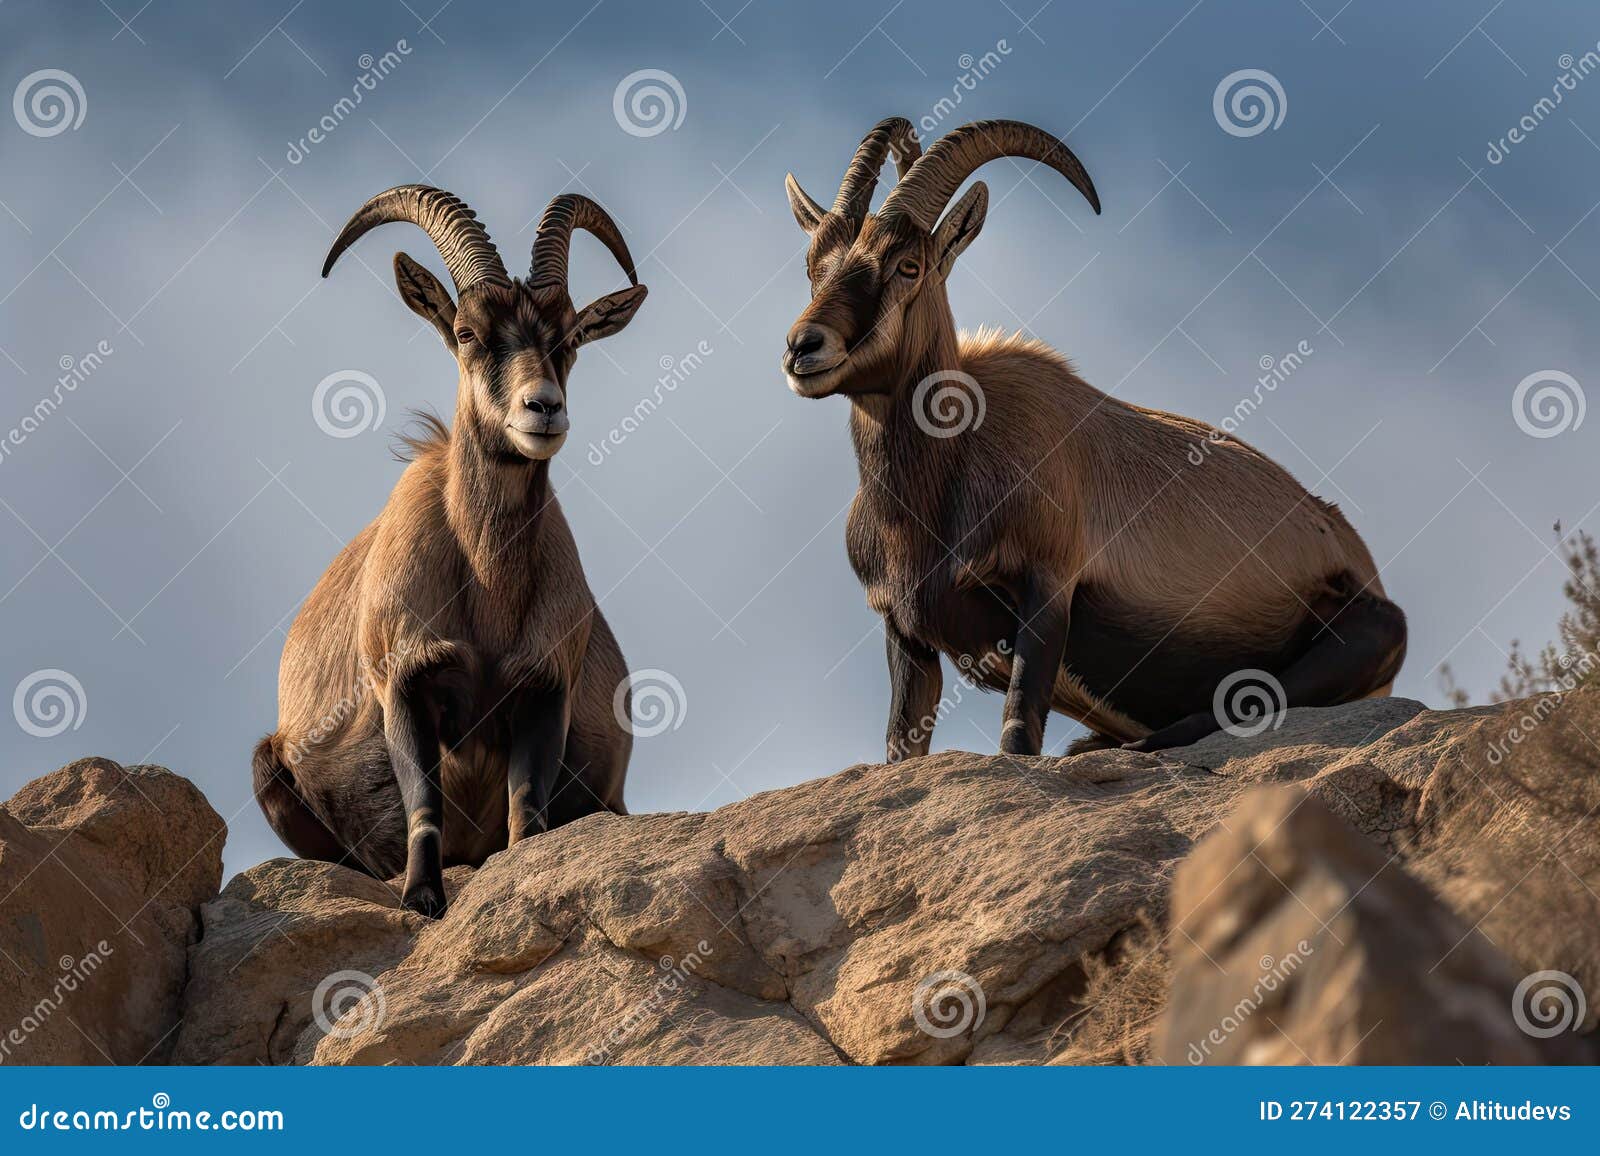 pair of ibex perched on a cliffside, with their hoofs and horns in full view